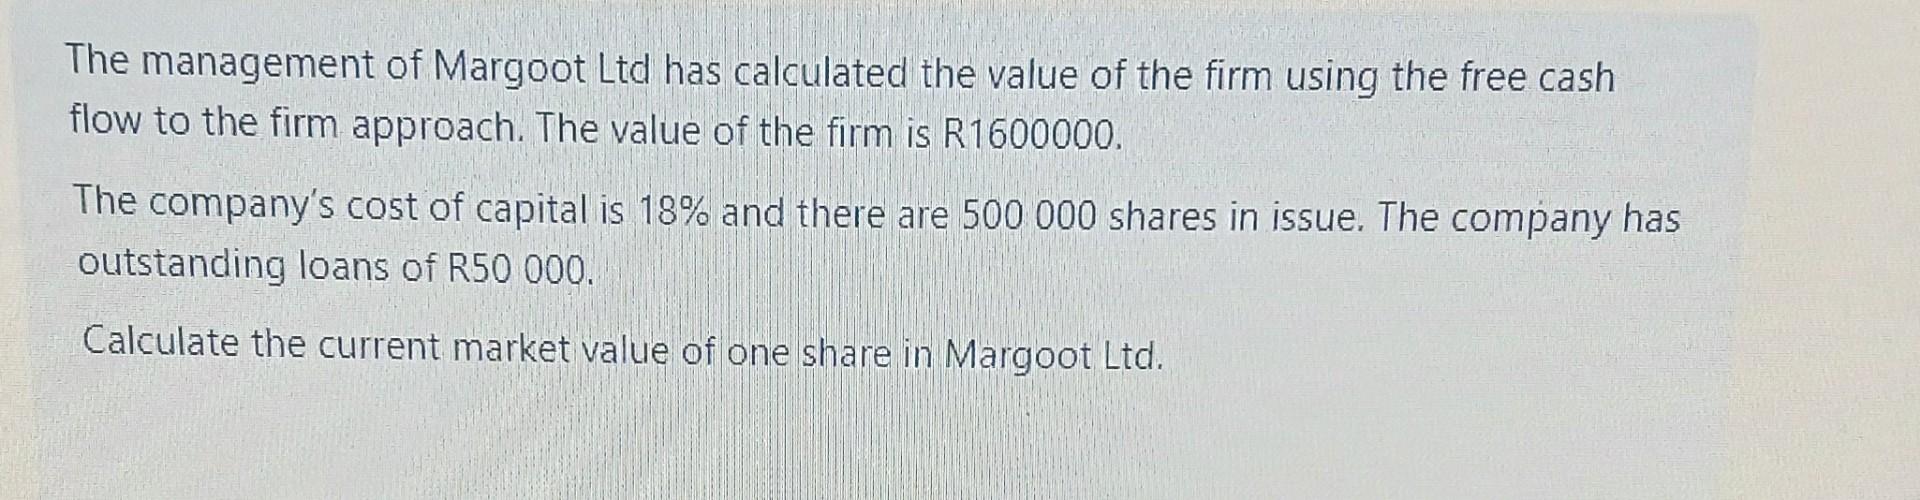 The management of Margoot Ltd has calculated the value of the firm using the free cash flow to the firm